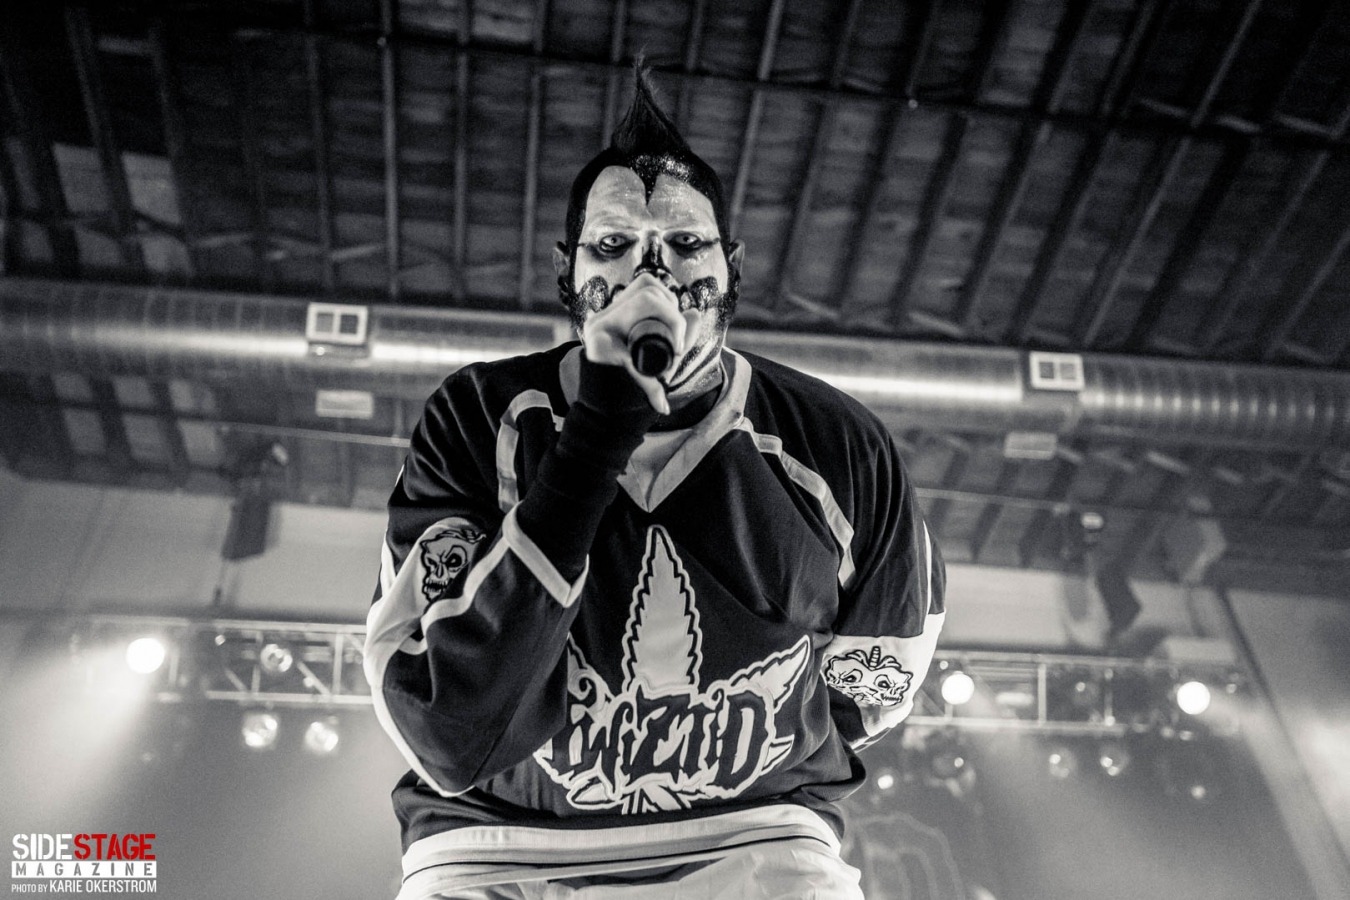 Twiztid's 420 show at The Crofoot Ballroom in Pontiac